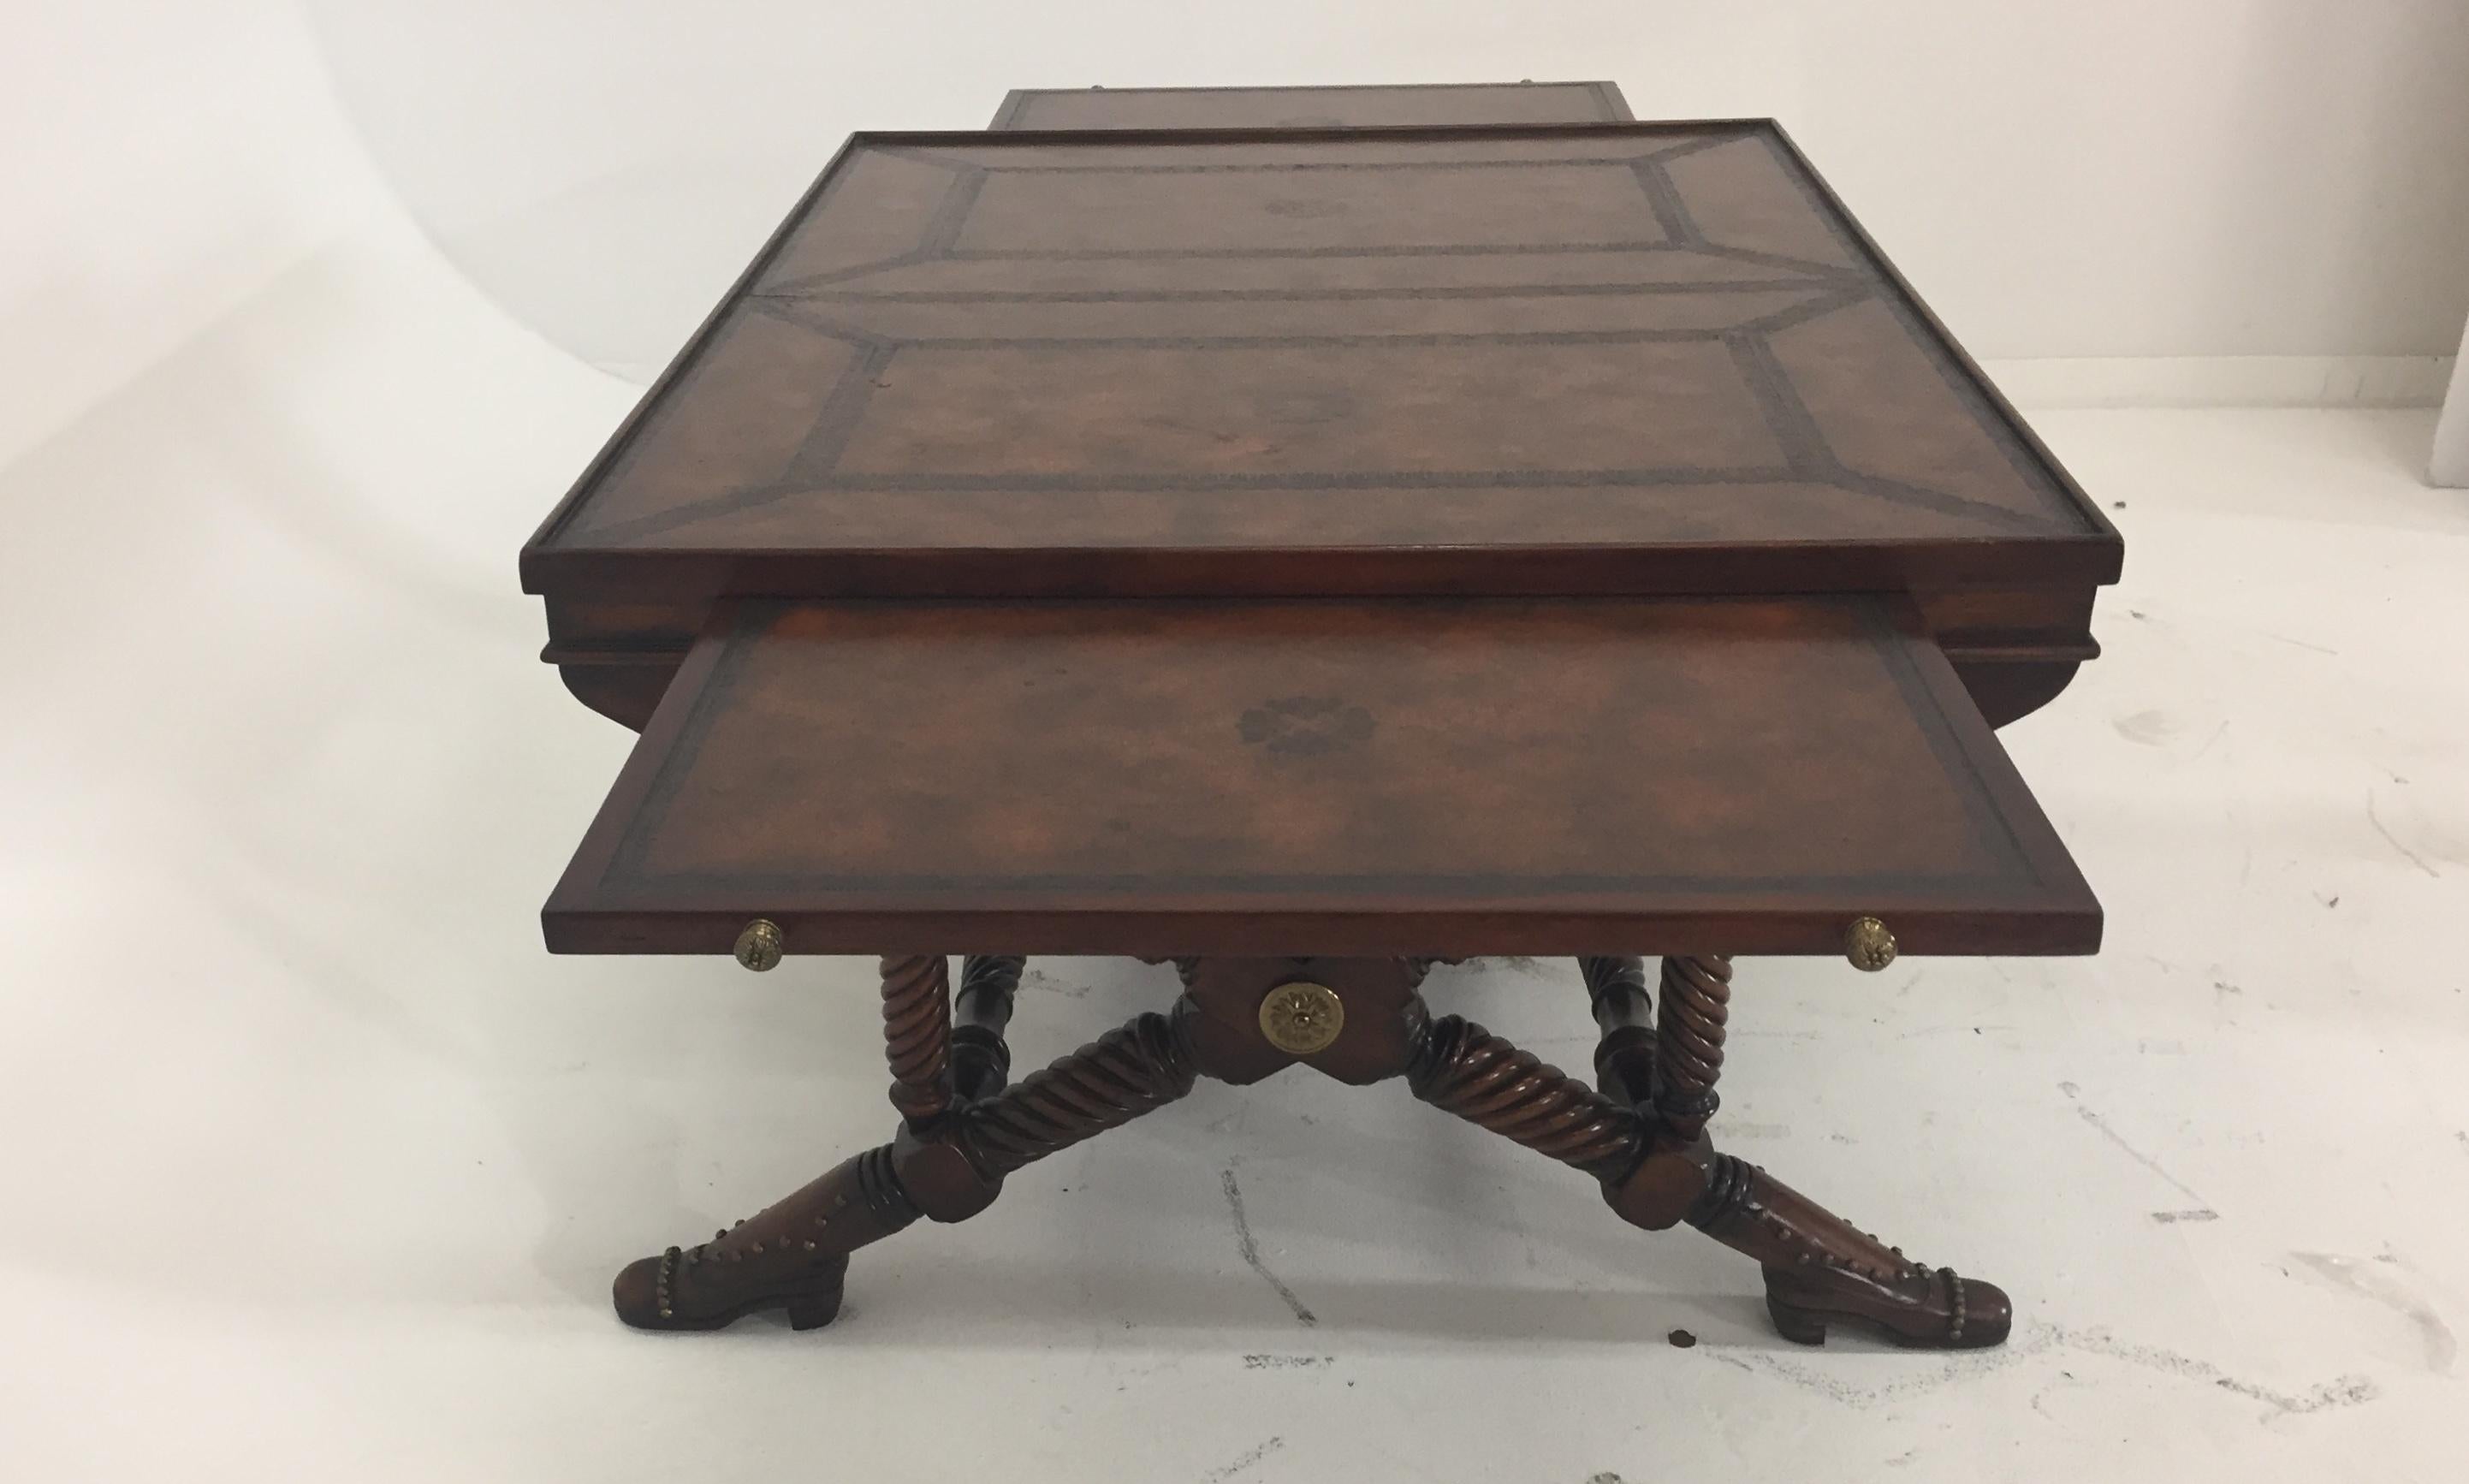 Rich and delightfully clever coffee table by Theodore Alexander having turned mahogany legs that end in adorable shoe feet with decorative nailheads. The top is leather and has two additional slides or trays for added surface area.
2 slides are 24